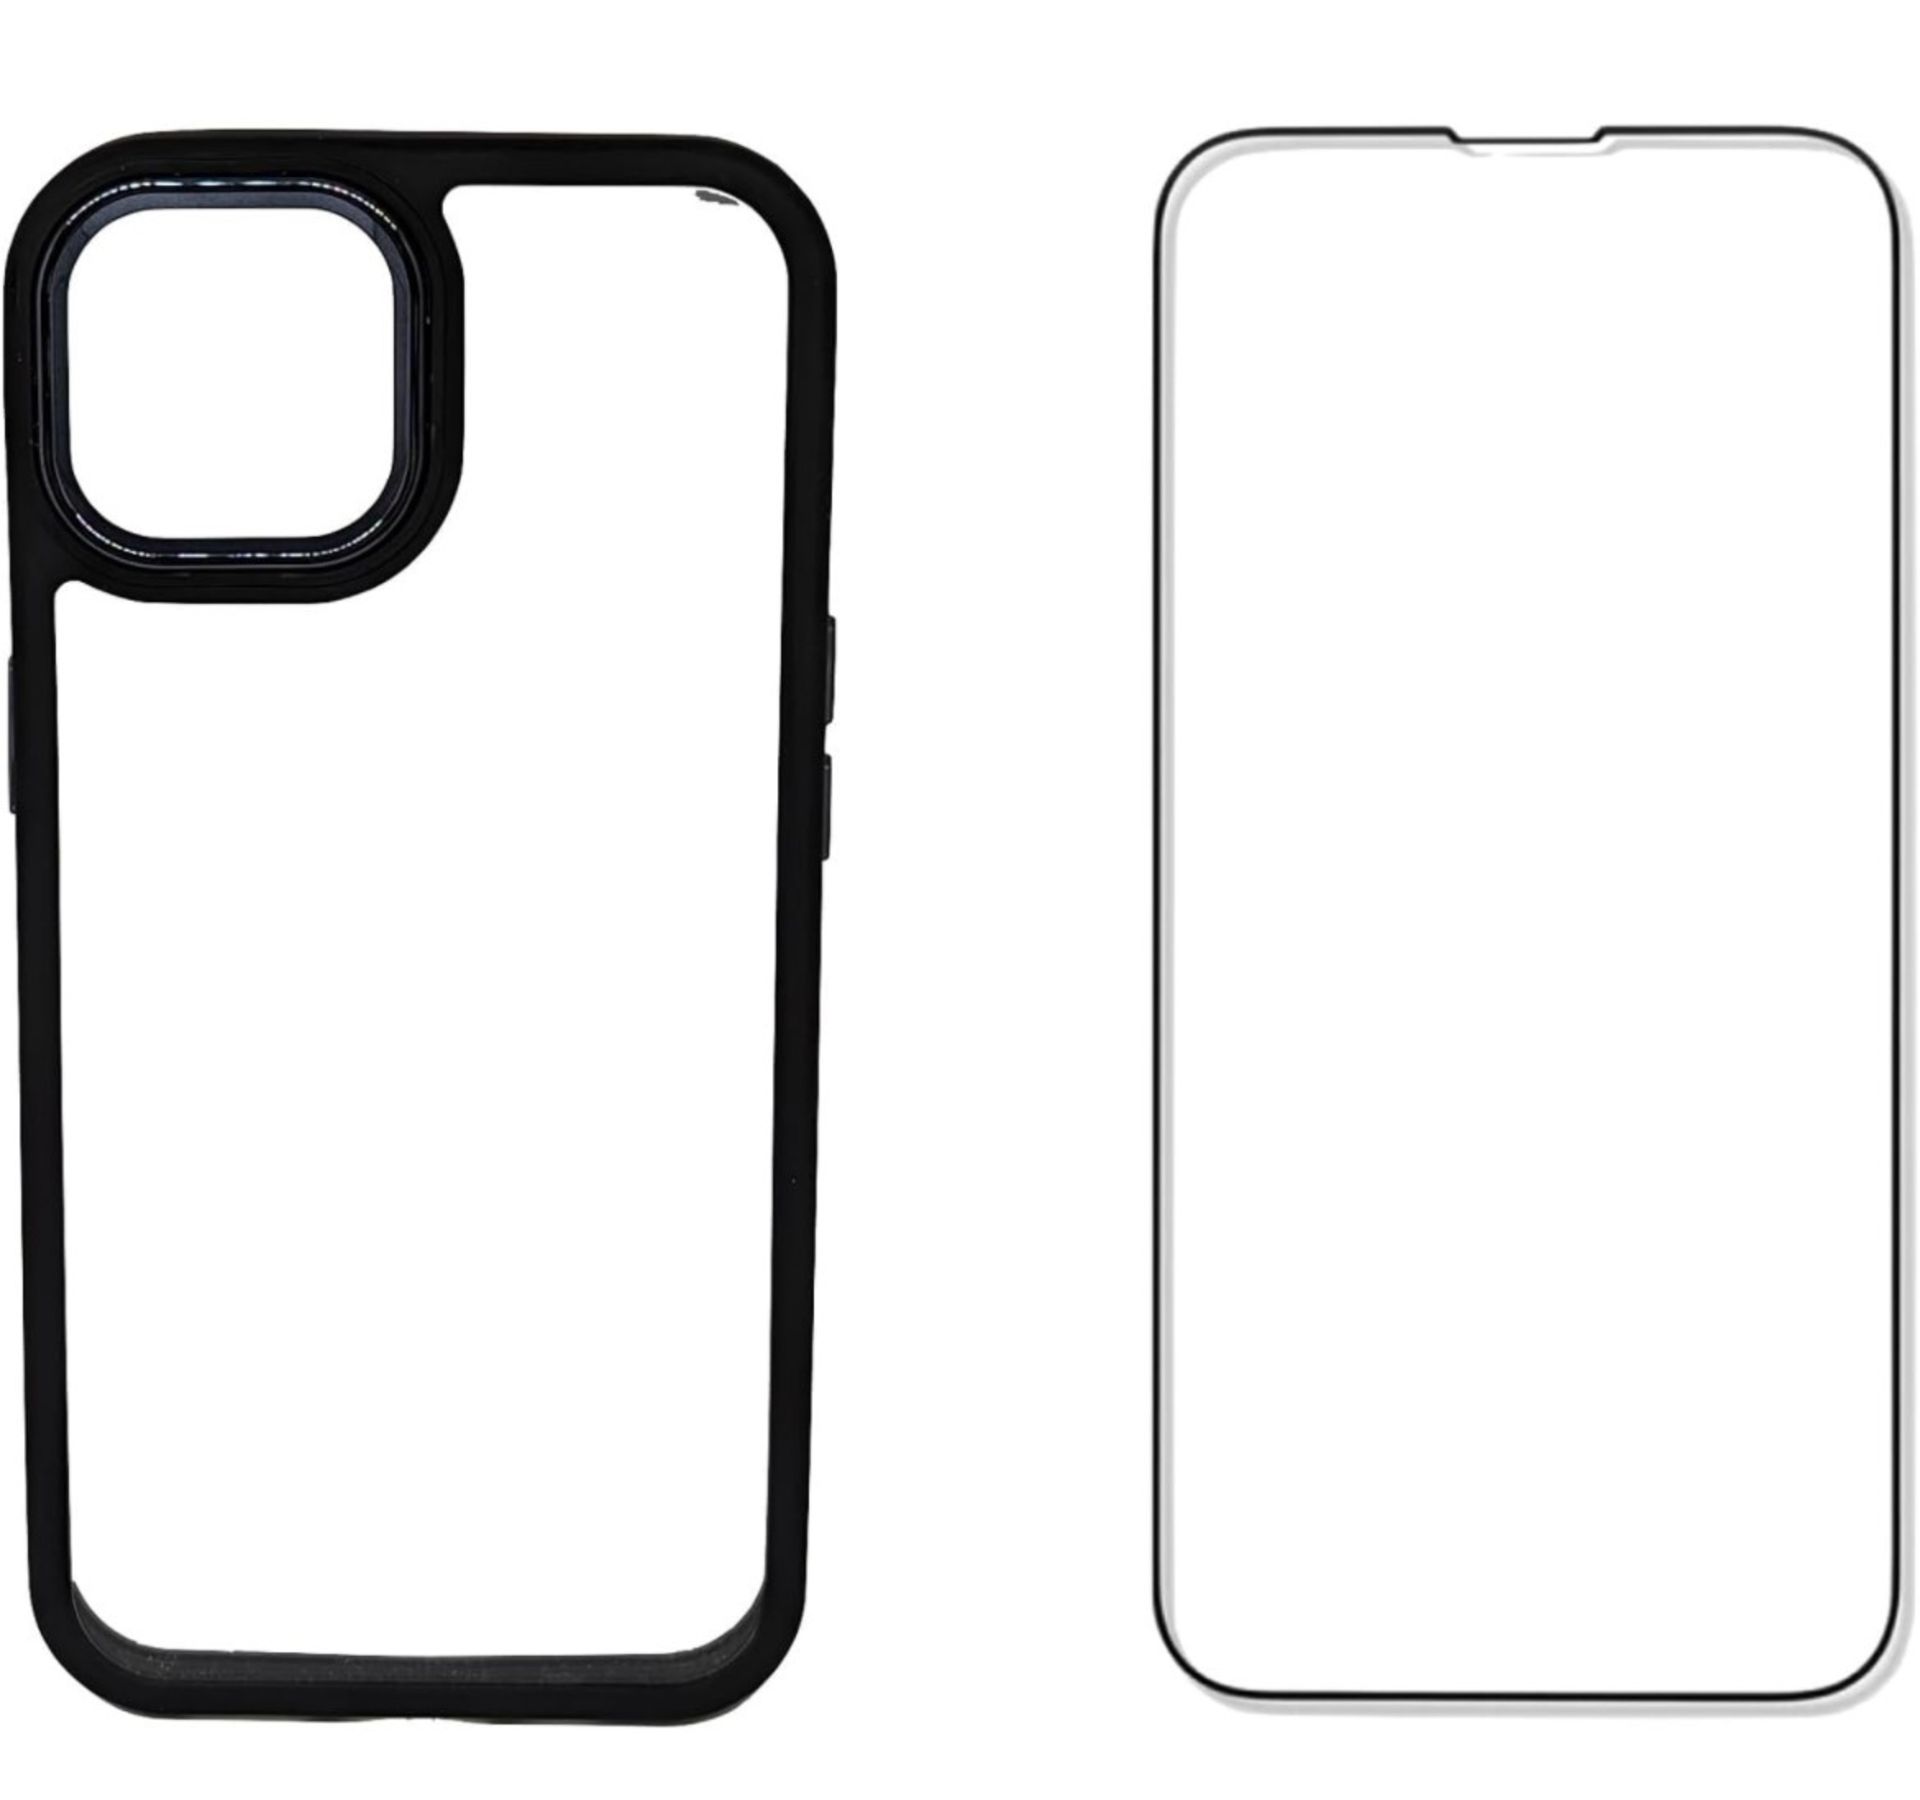 Set Of 100 X Black iPhone Covers With Glass Screen Protectors - Bild 3 aus 3